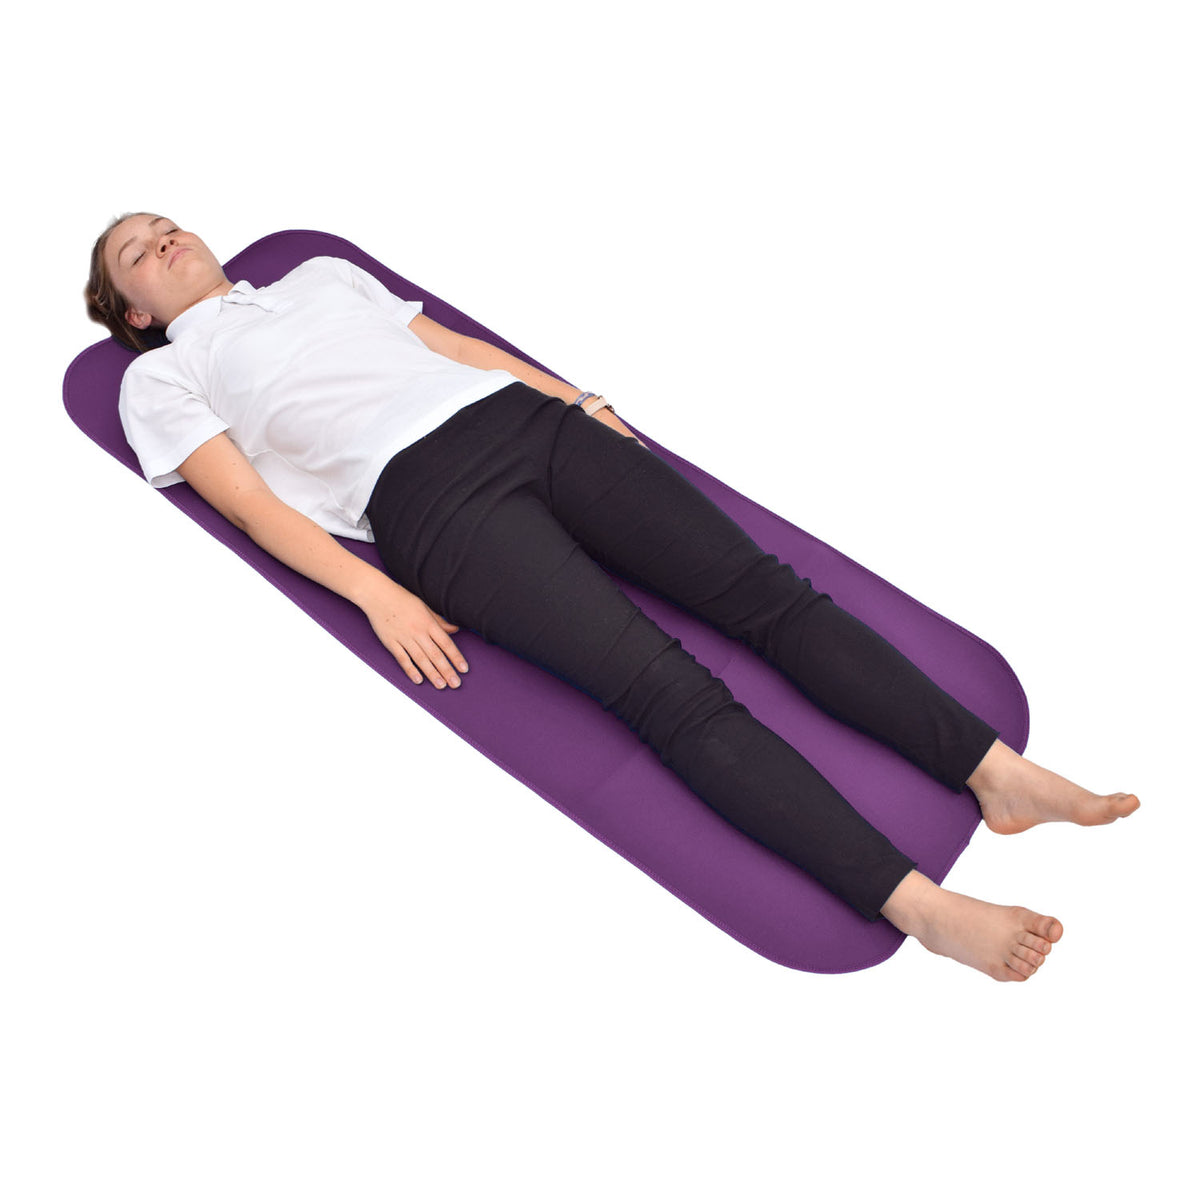 Adult and Teenager Changing Mat and Waterproof Bag Set - Aubergine/Black | Incontinence Aids | Care Designs